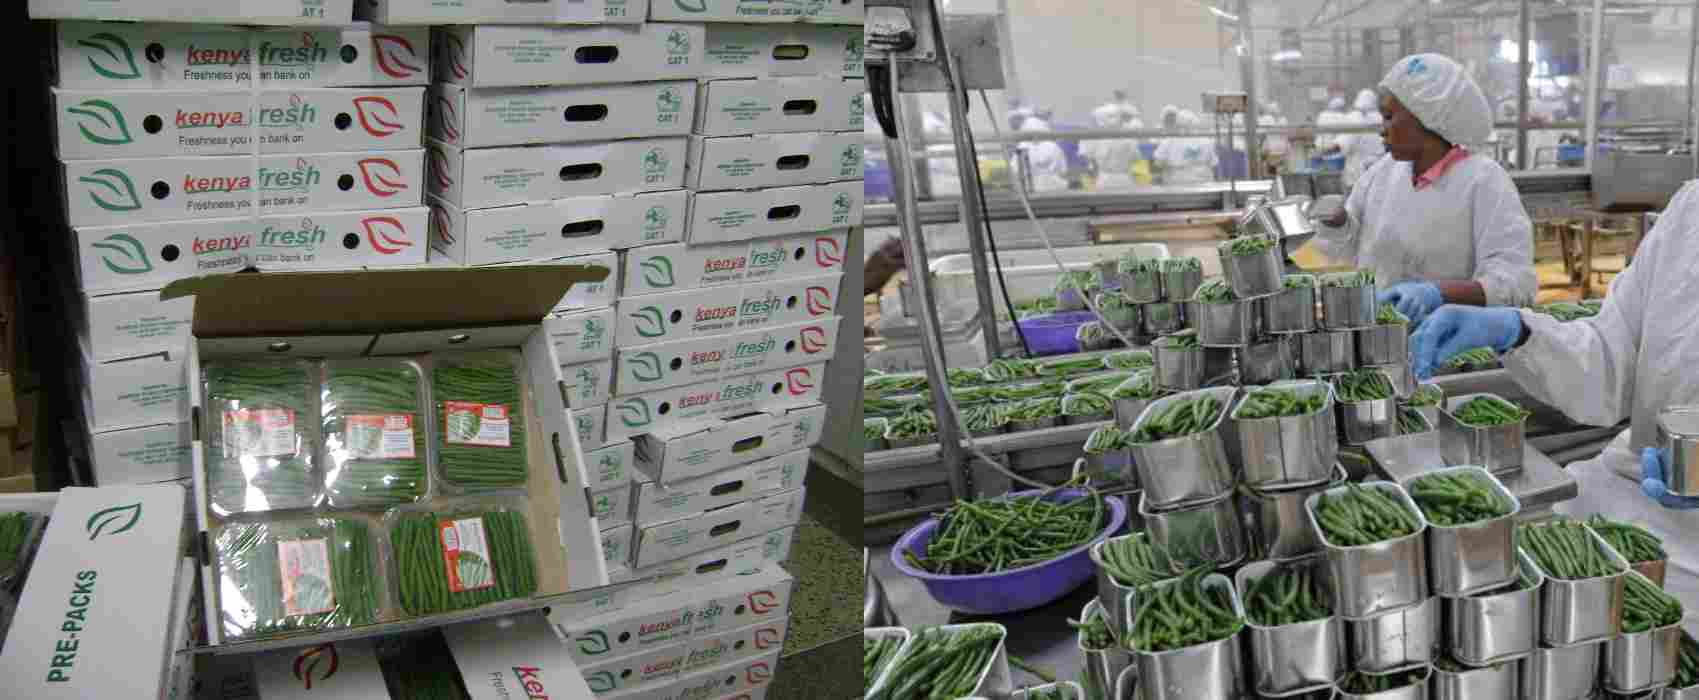 French beans and horticultural exporters in Kenya.